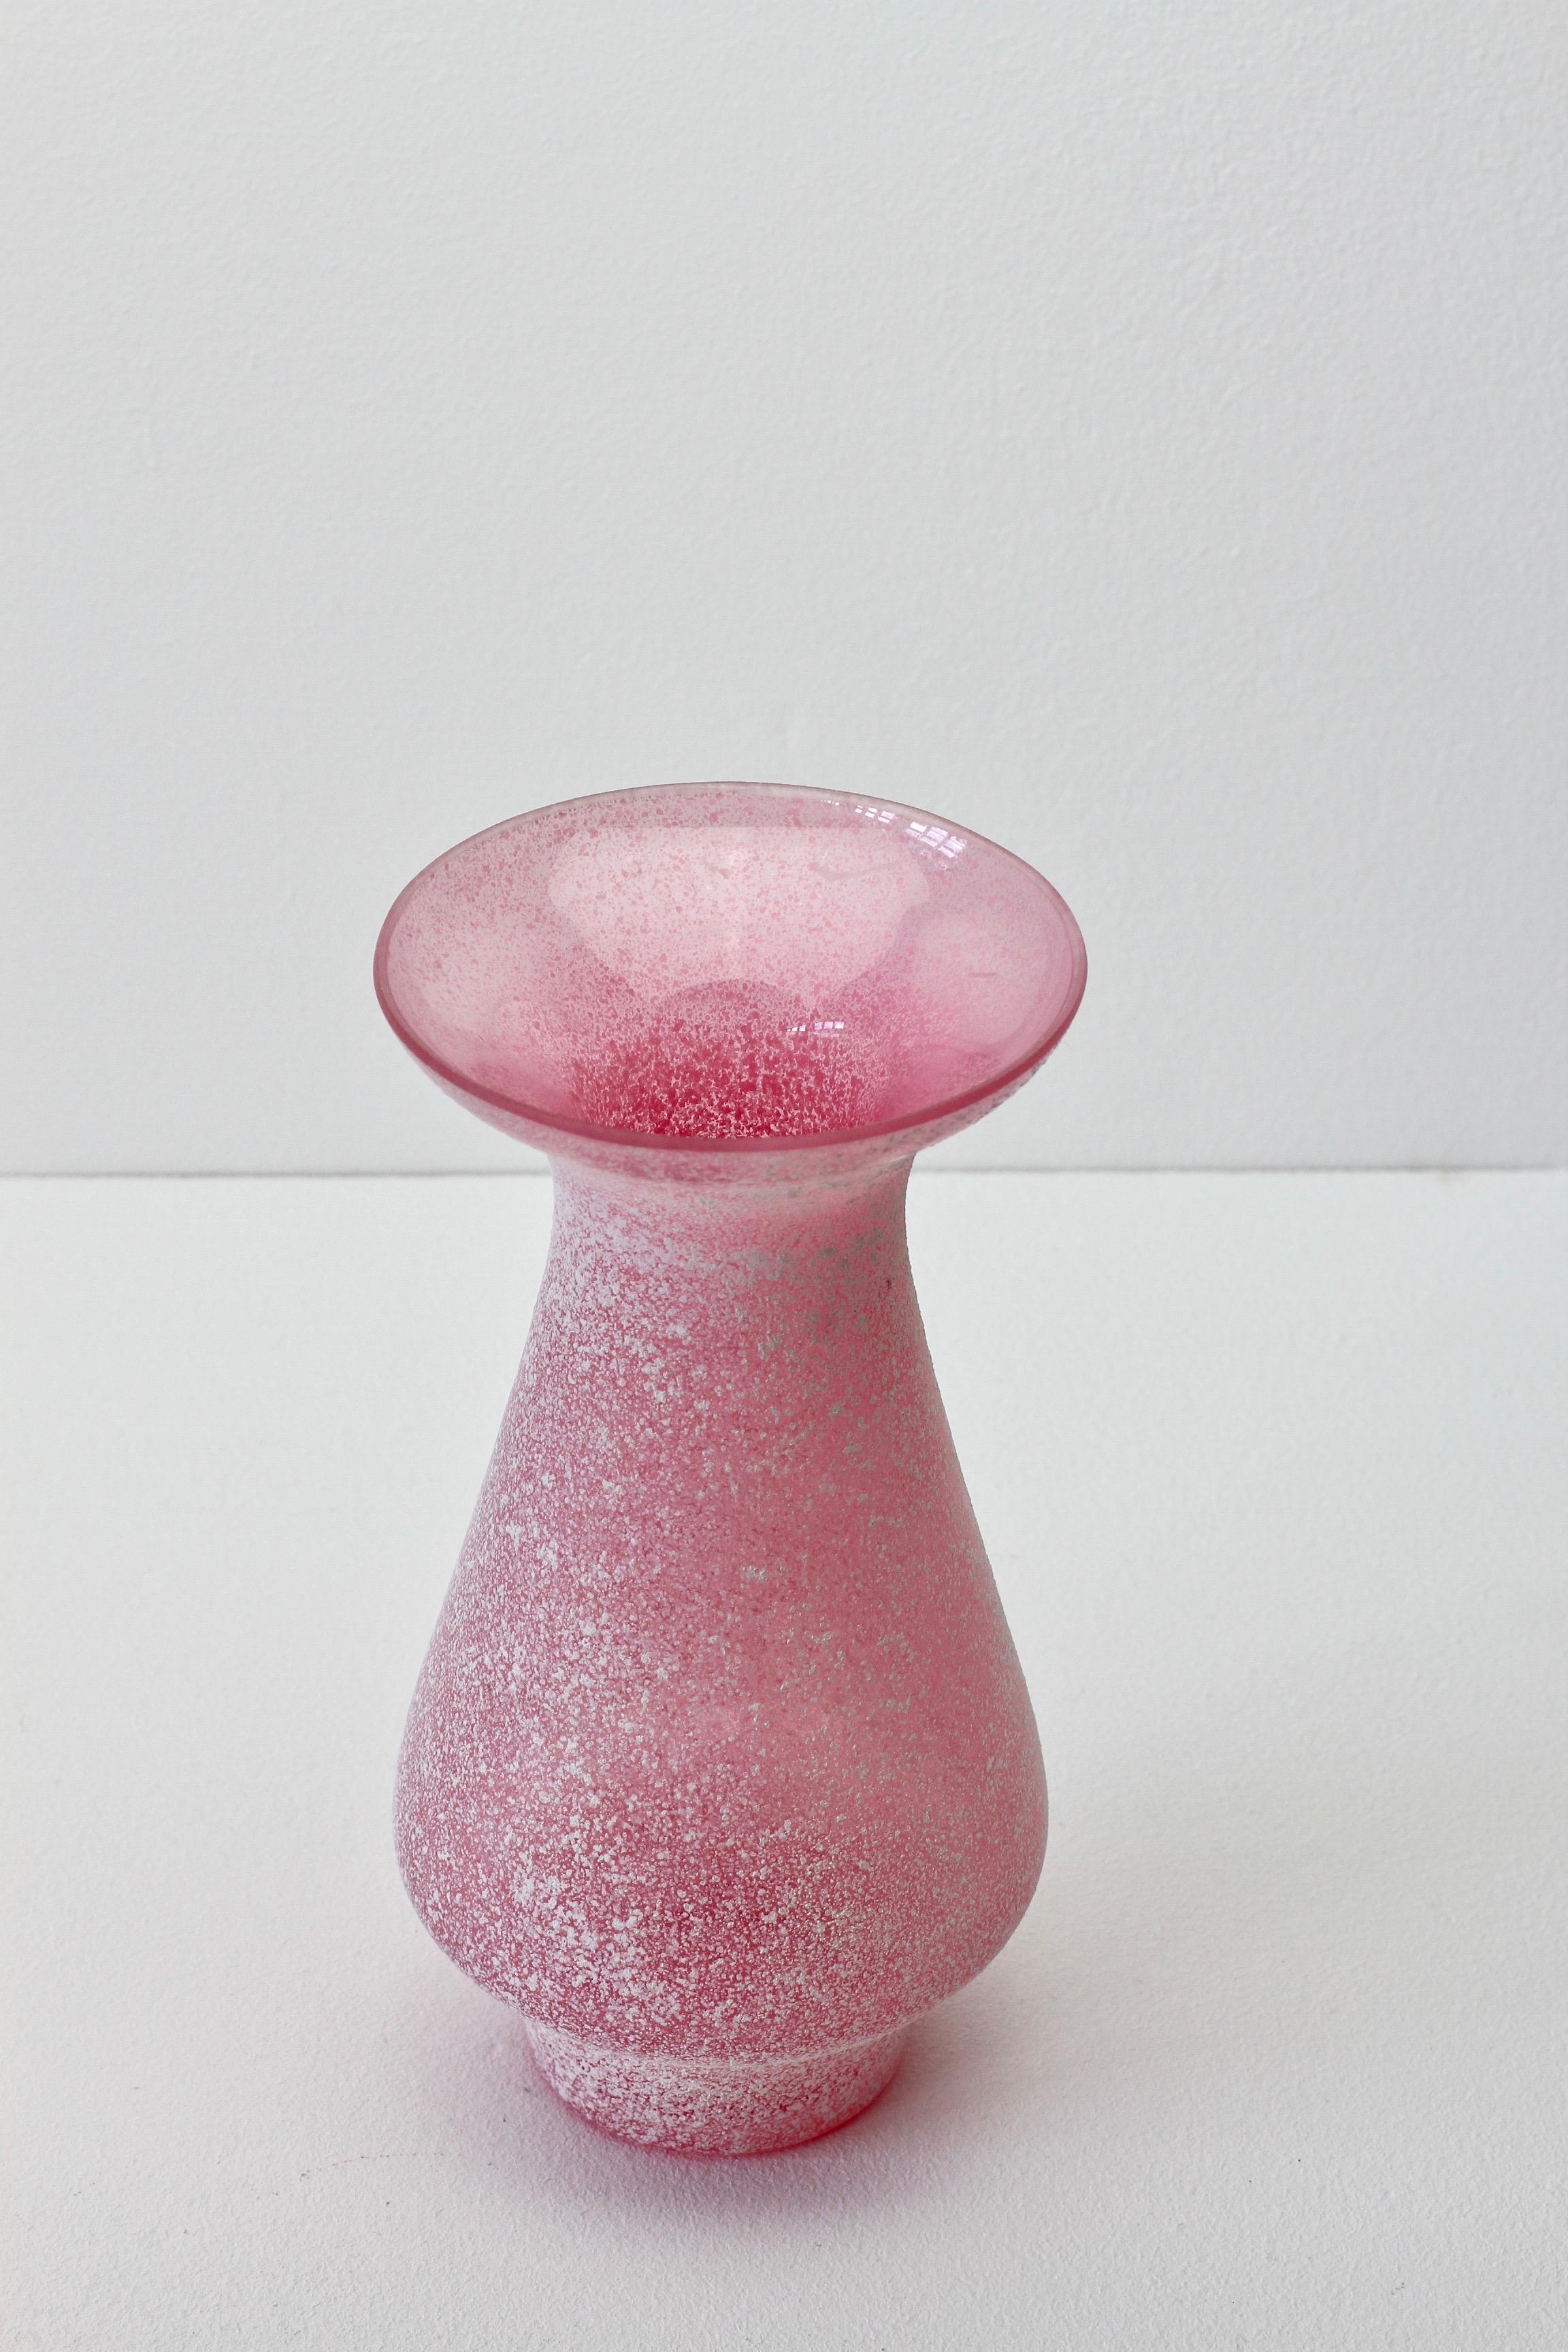 Beautiful 'a Scavo' bright pink colored/ coloured glass vase or vessel by Seguso Vetri d'Arte Murano, Italy, circa 1970s. Elegant in form and showing extraordinary craftmanship with the use of the 'Scavo' technique to replicate to look and feel of